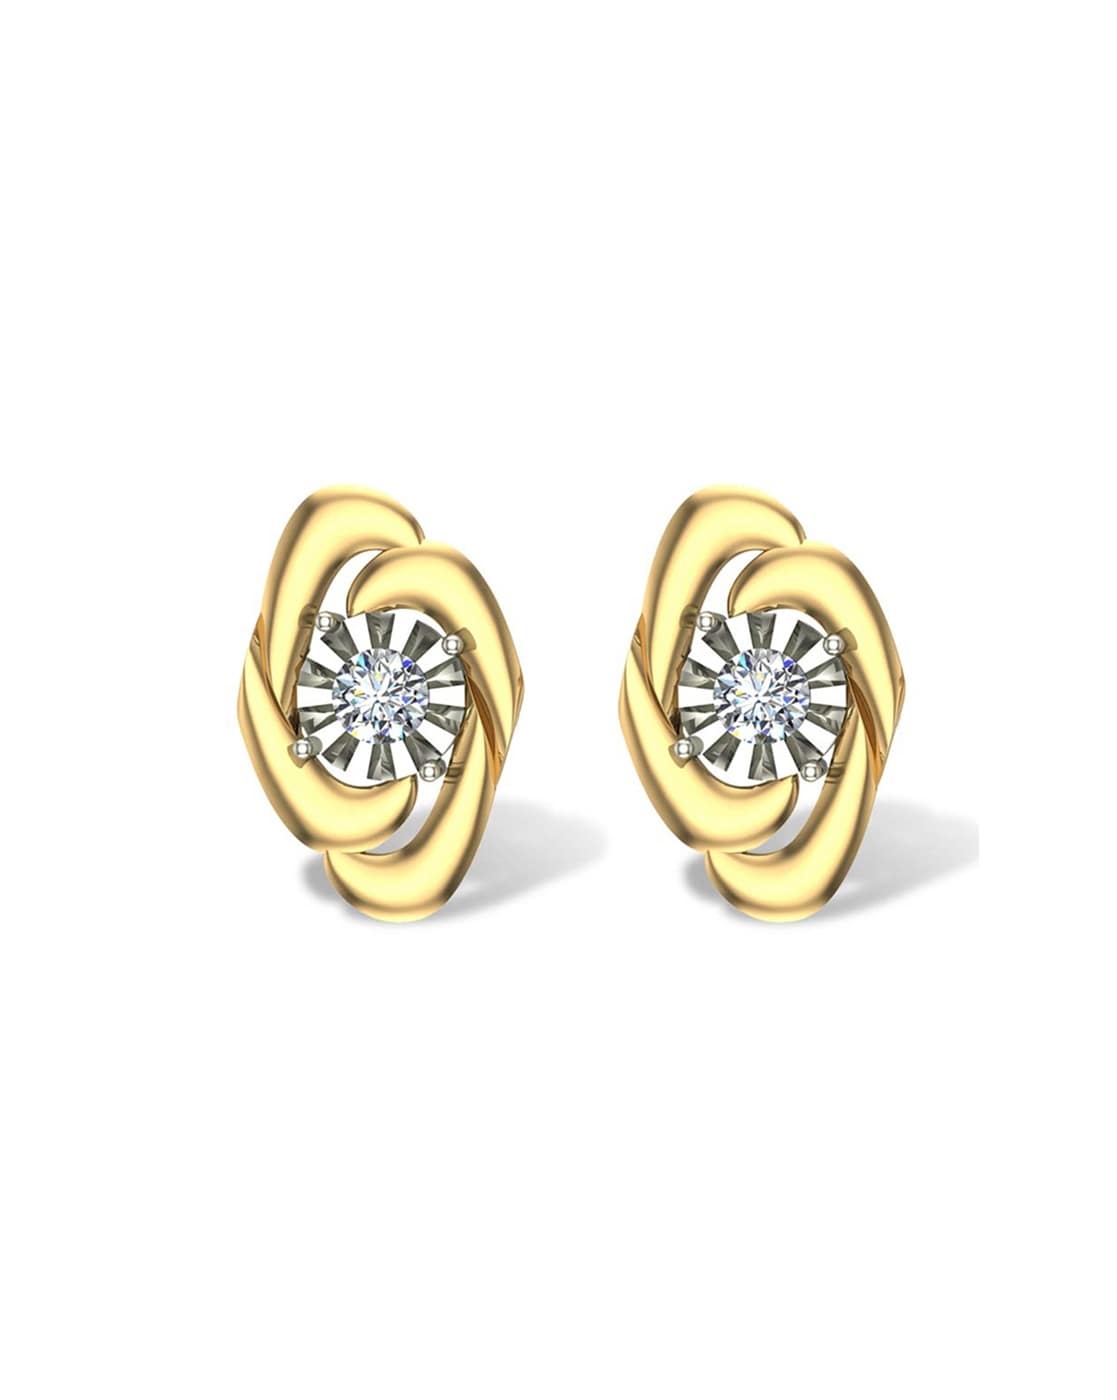 18K Solid Yellow Gold 4mm Diamond Stud Earring, Solitaire Diamond Bezel  Setting Studs, Single or Pair of Studs With Push Back - Etsy